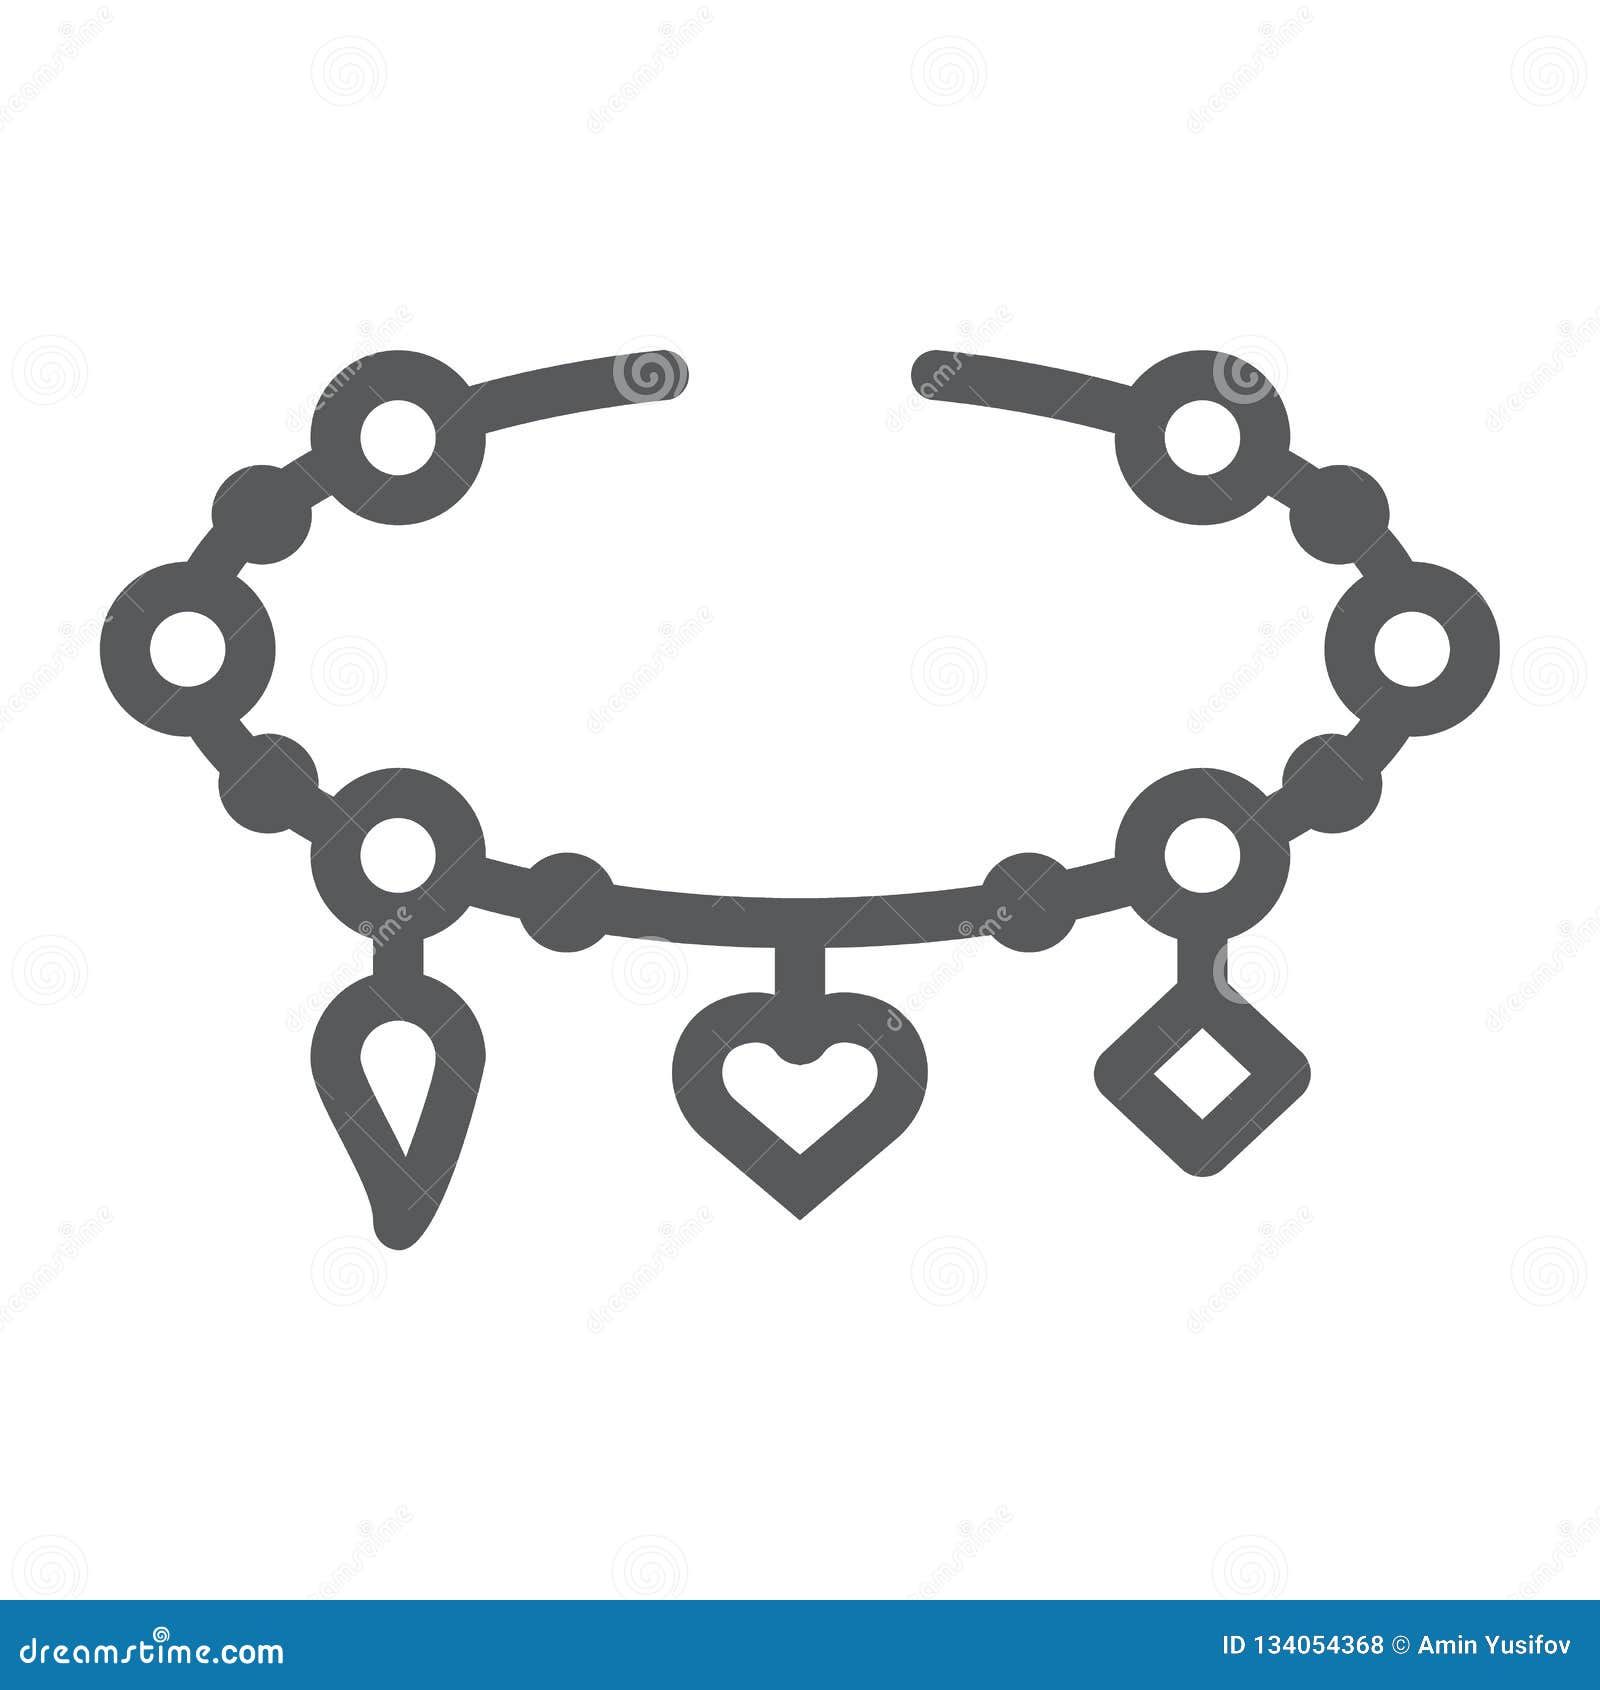 Necklace Hand Images - Free Download on Freepik